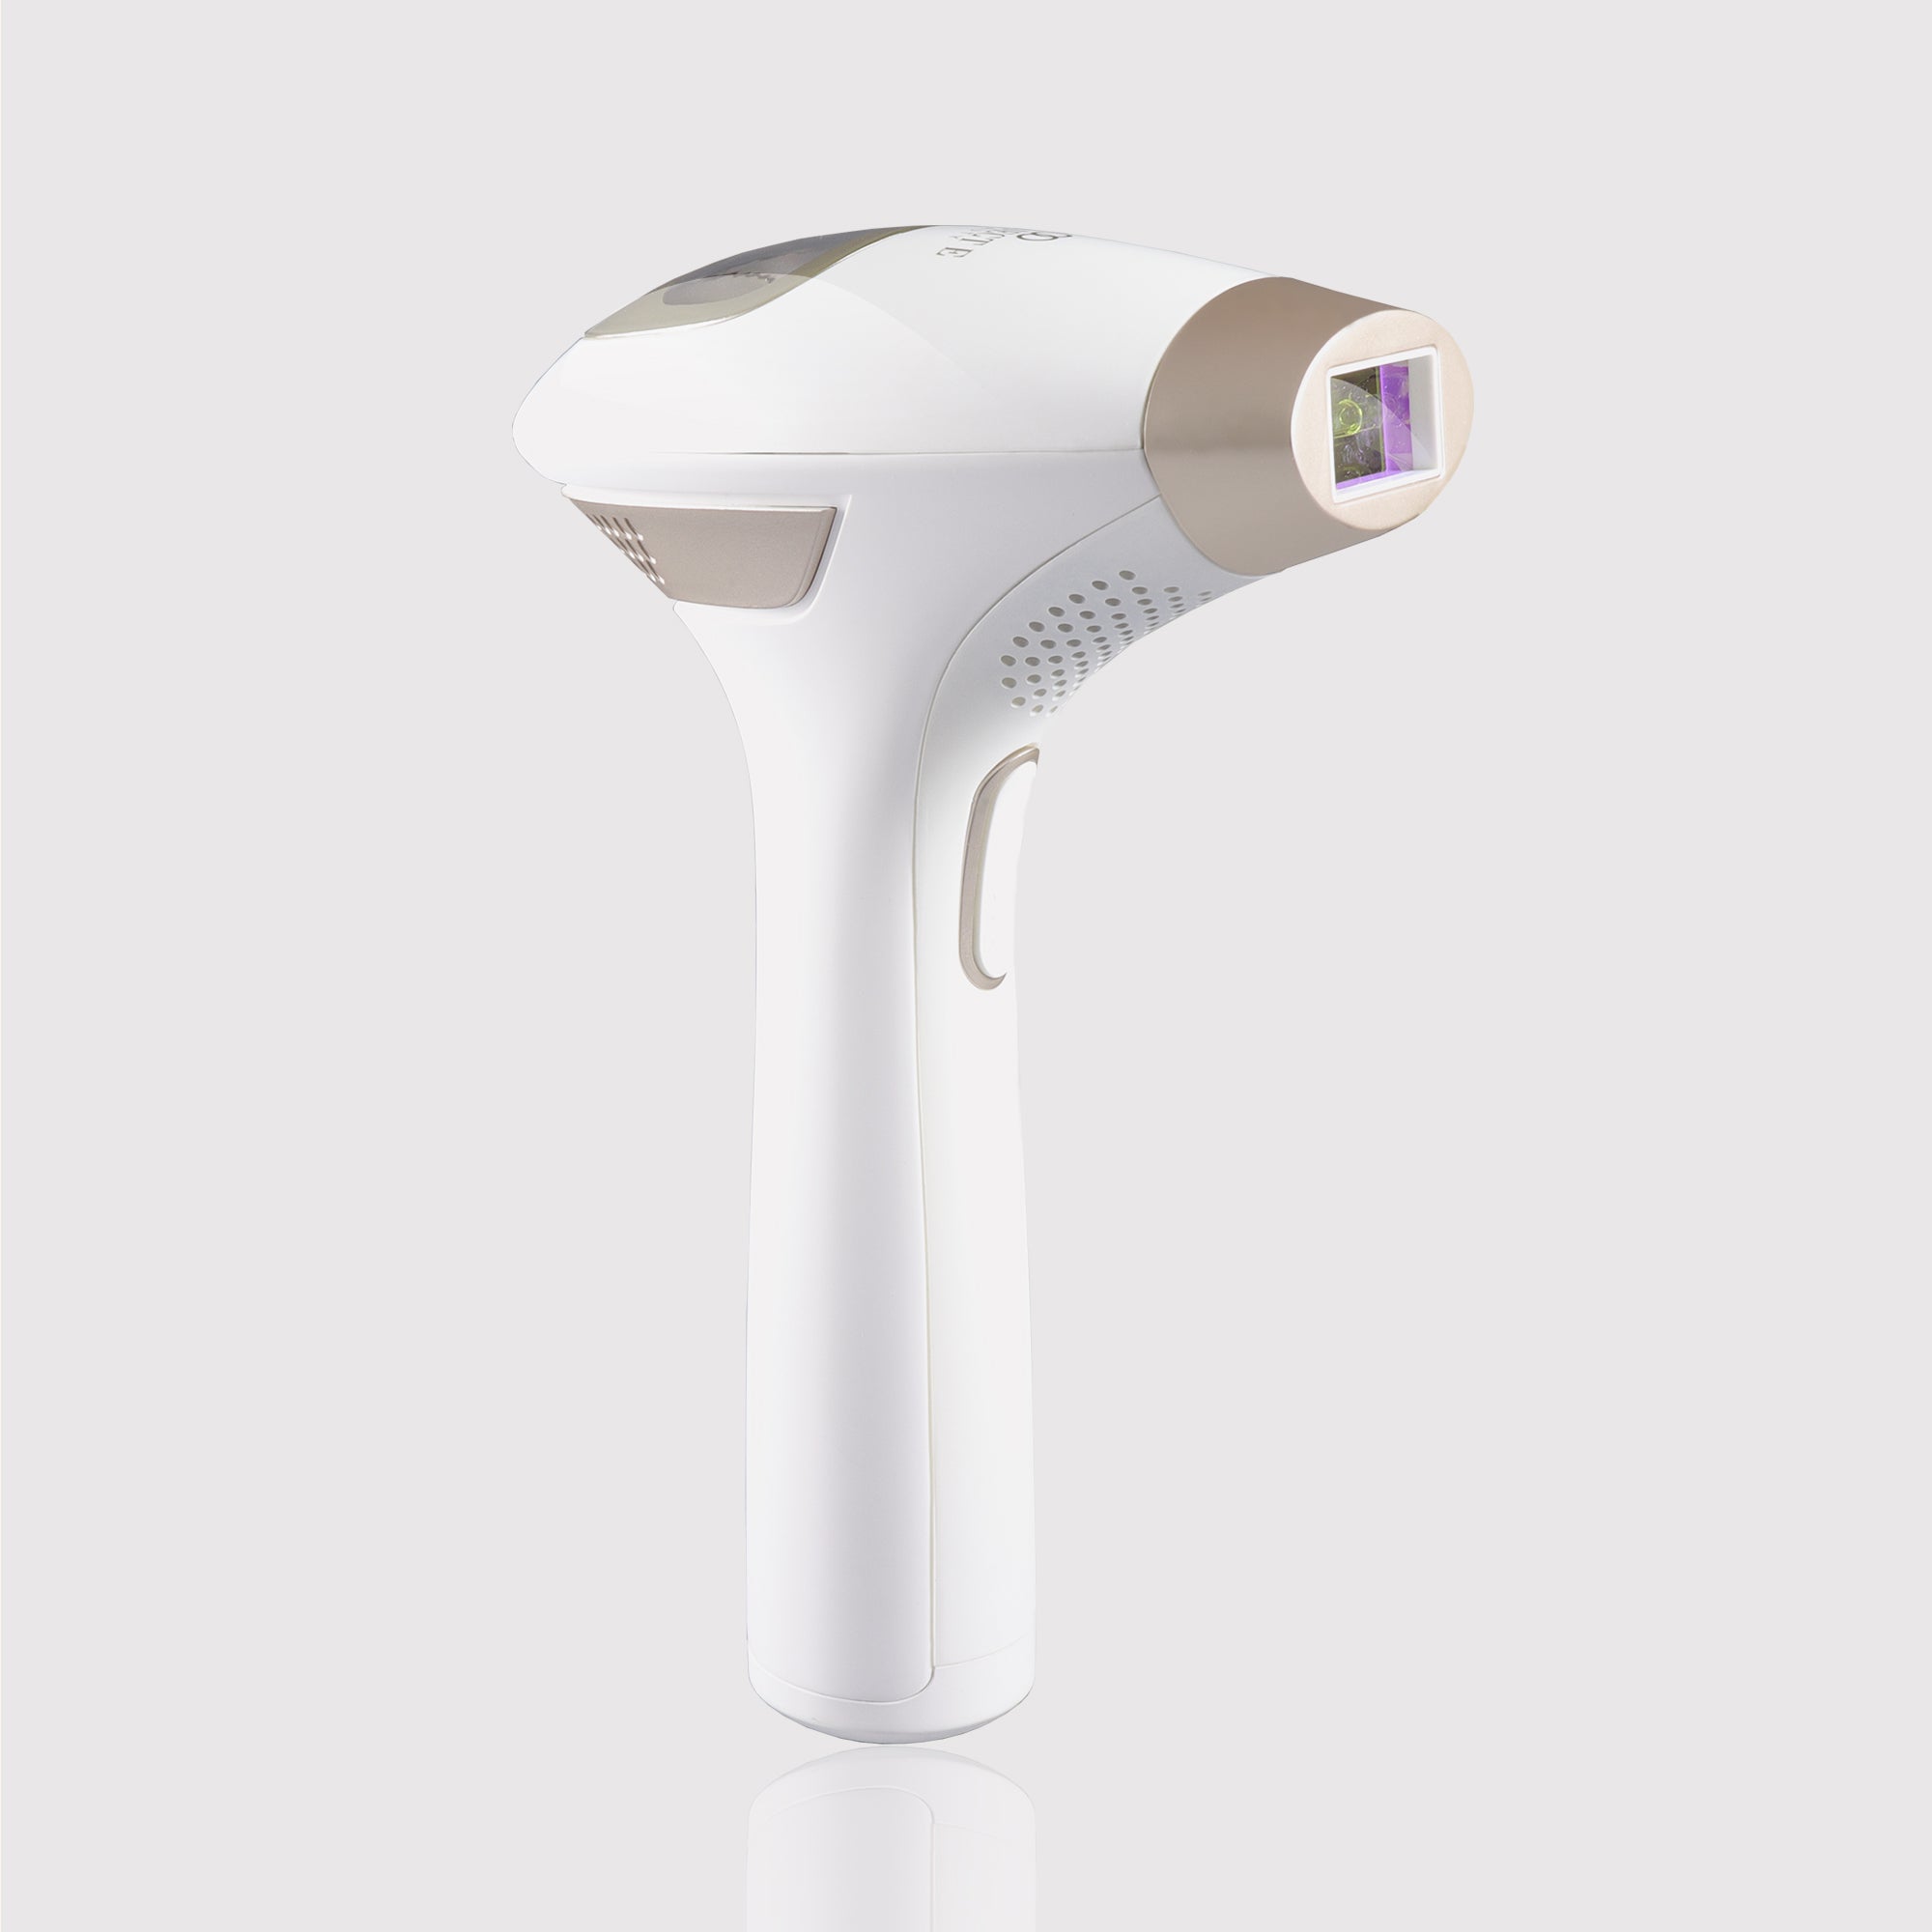 Laser Hair Removal Device IPL - Project E Beauty